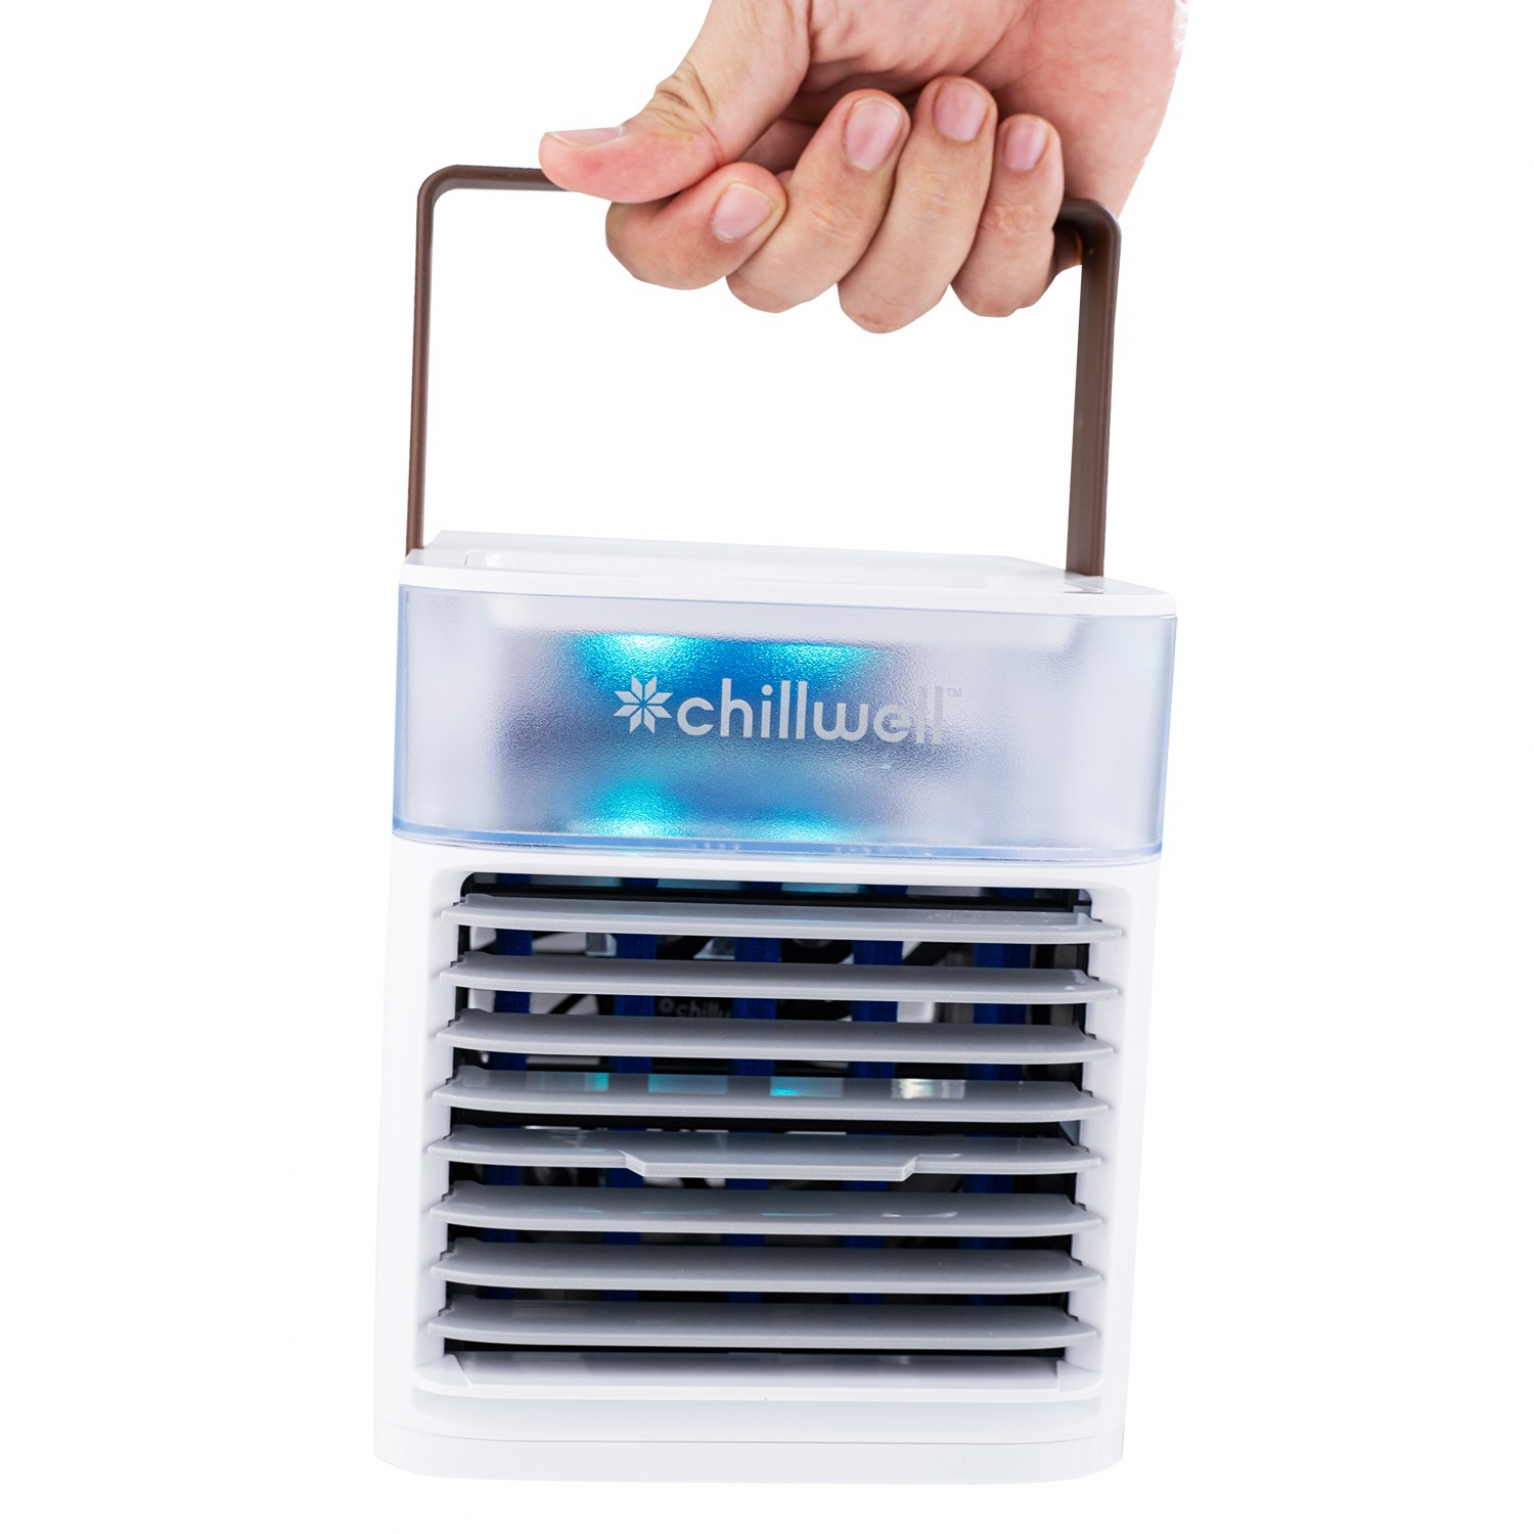 Price Of Chillwell Ac Cooler